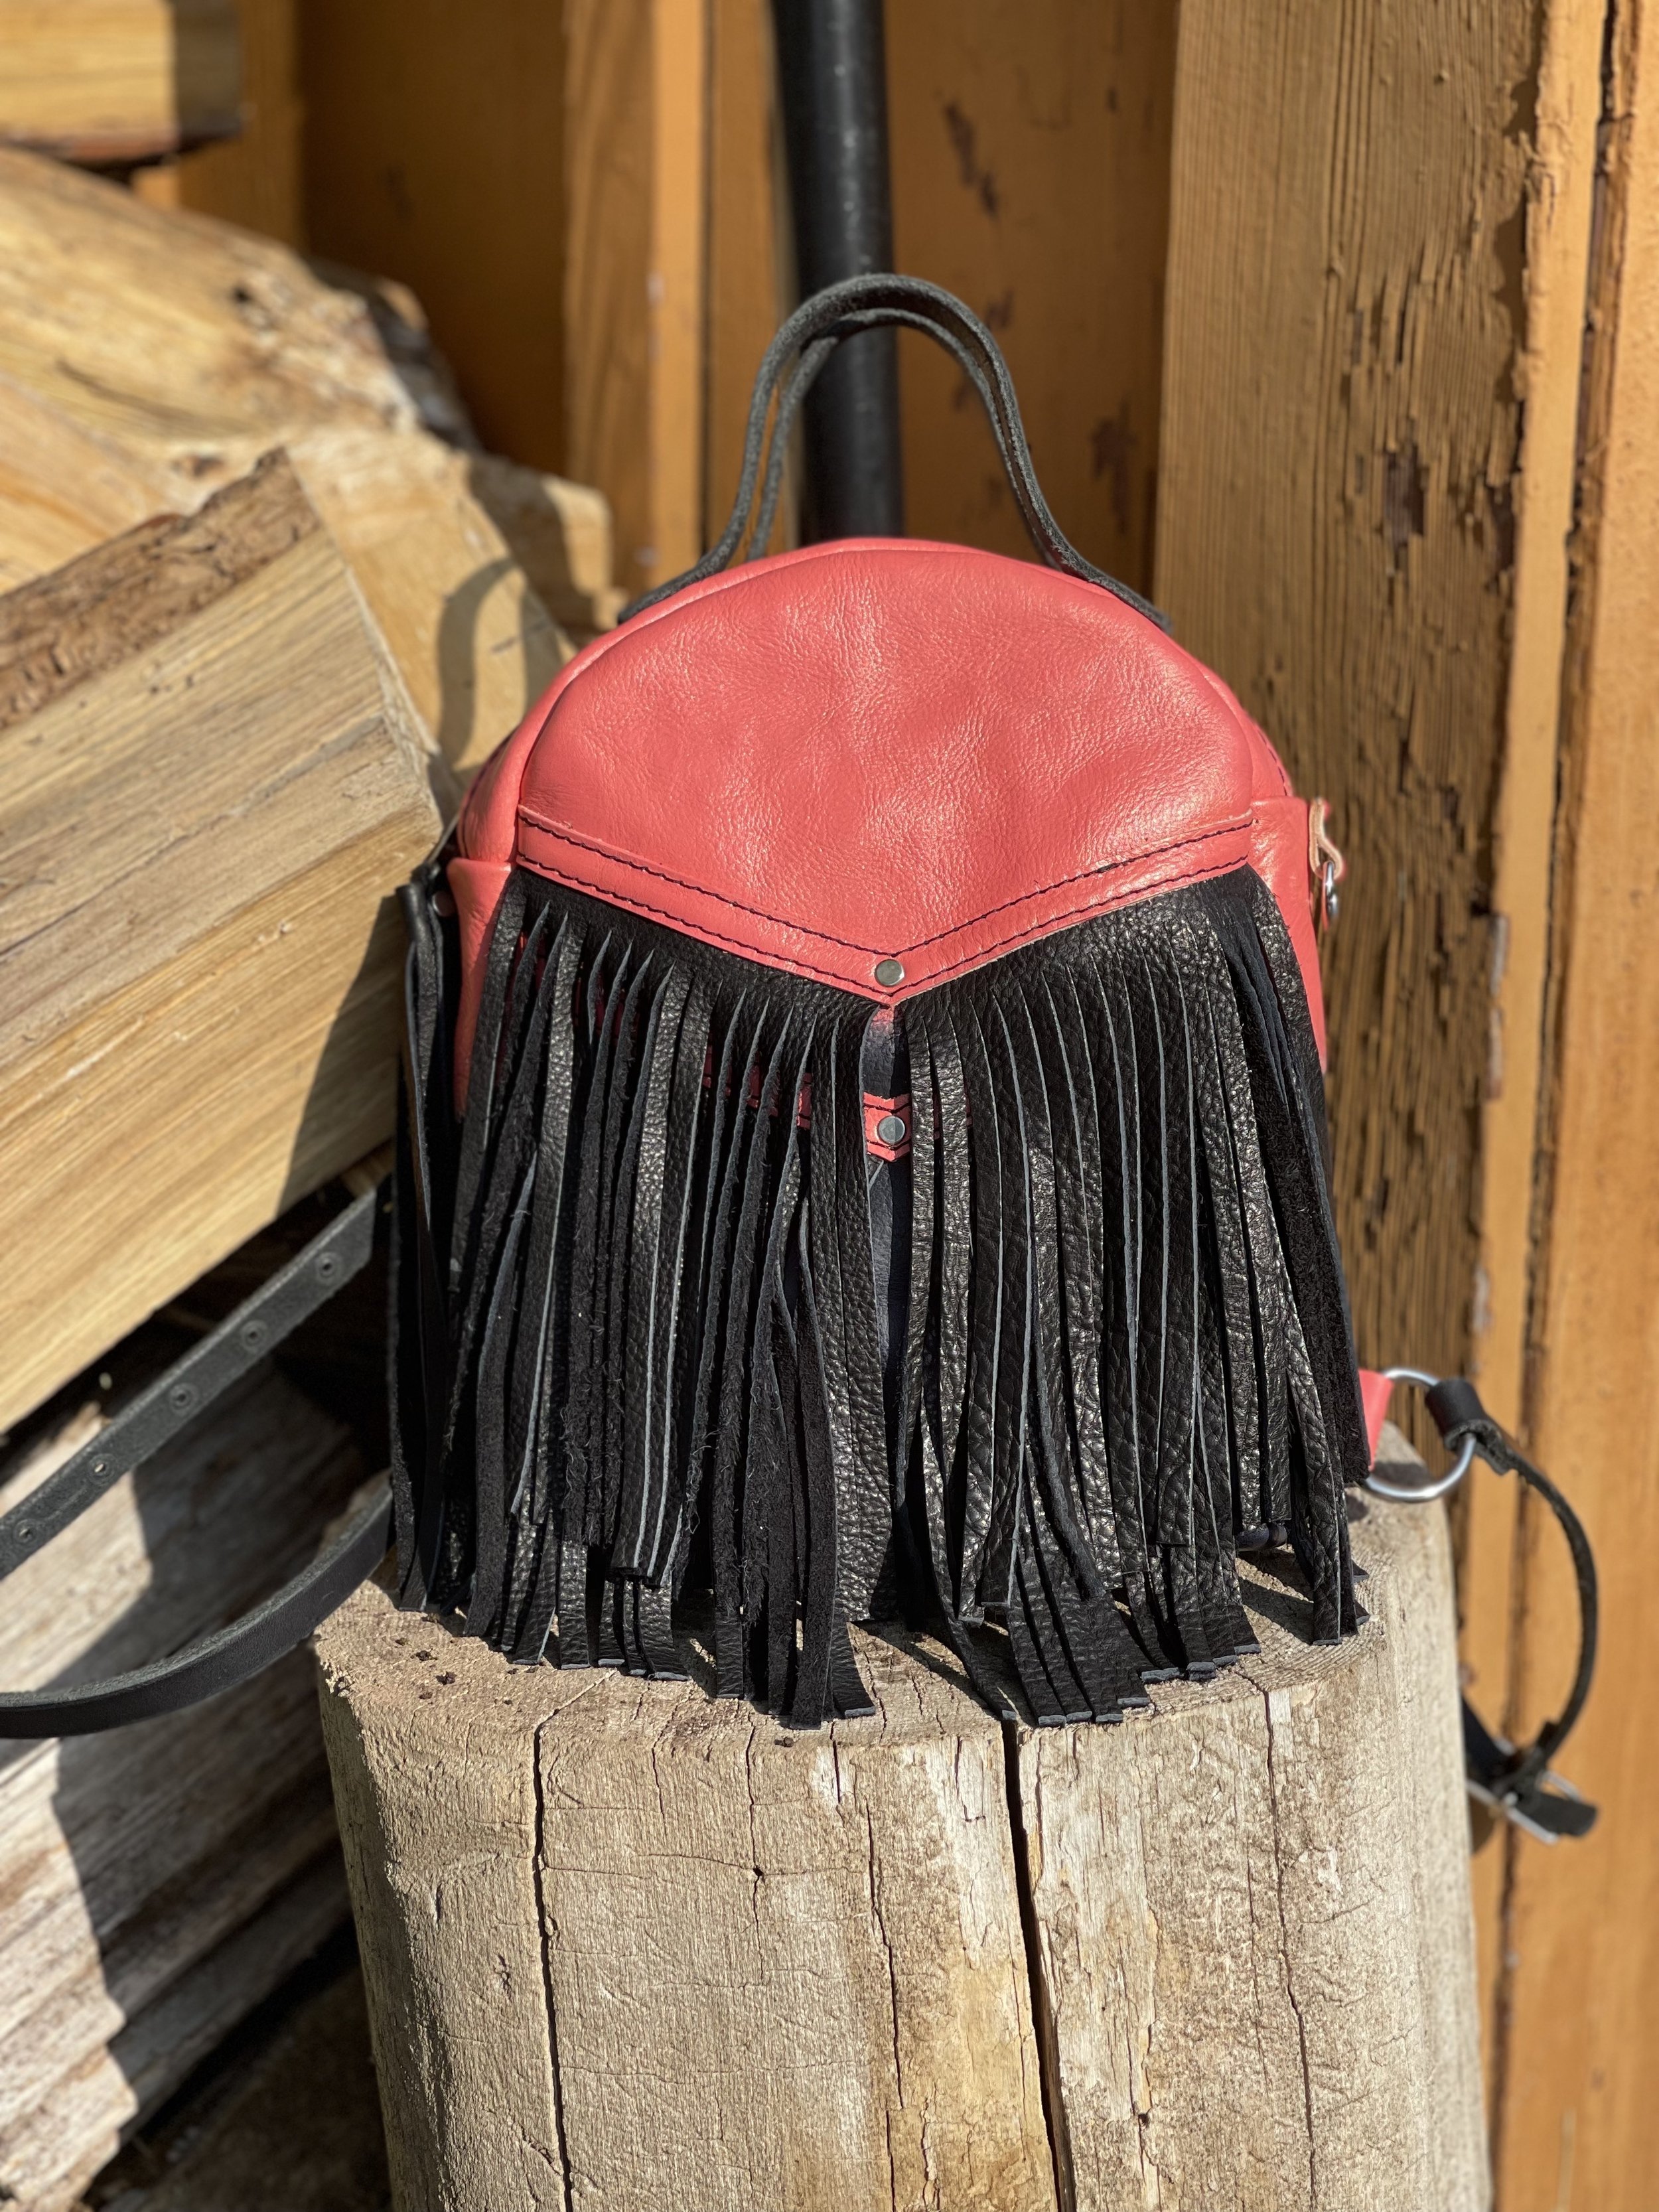 Mini Backpack - Vegetable tanned cowhide leather hand dyed ombre in Cheeky Gold to Coal, 2 Simple Handles, Black bison fringe, Flair D ring